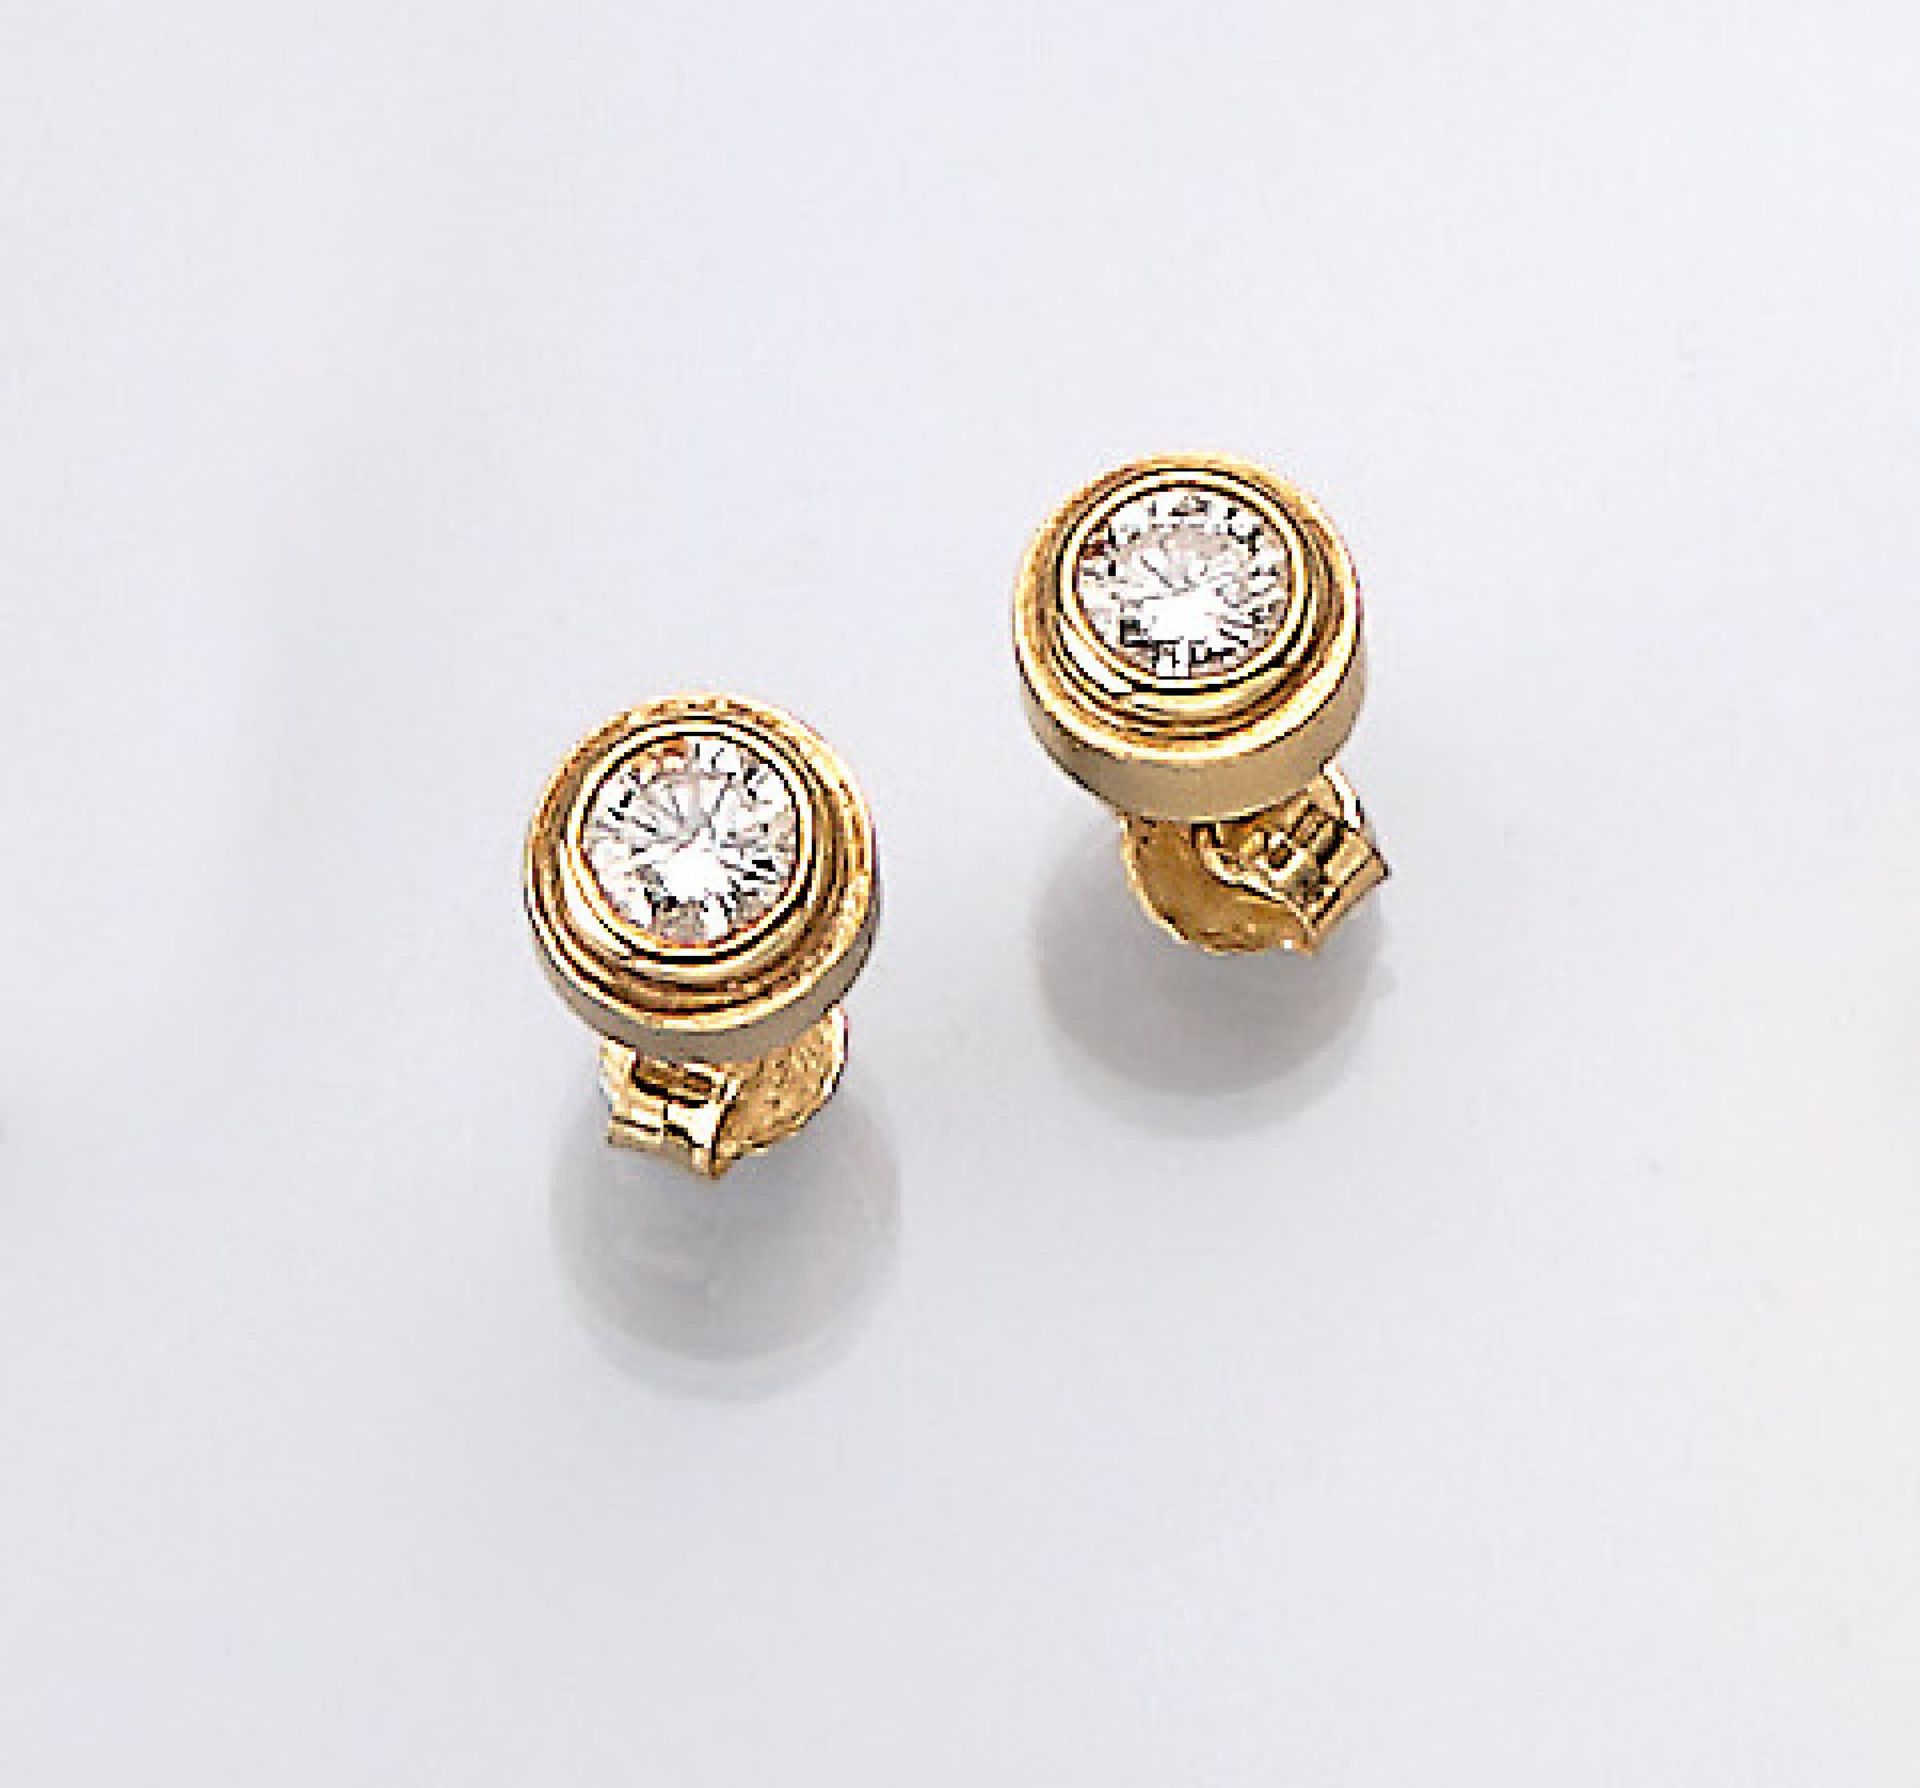 Pair of 18 kt gold earrings with brilliants , YG 750/000, brilliants total approx. 0.80 ct Top